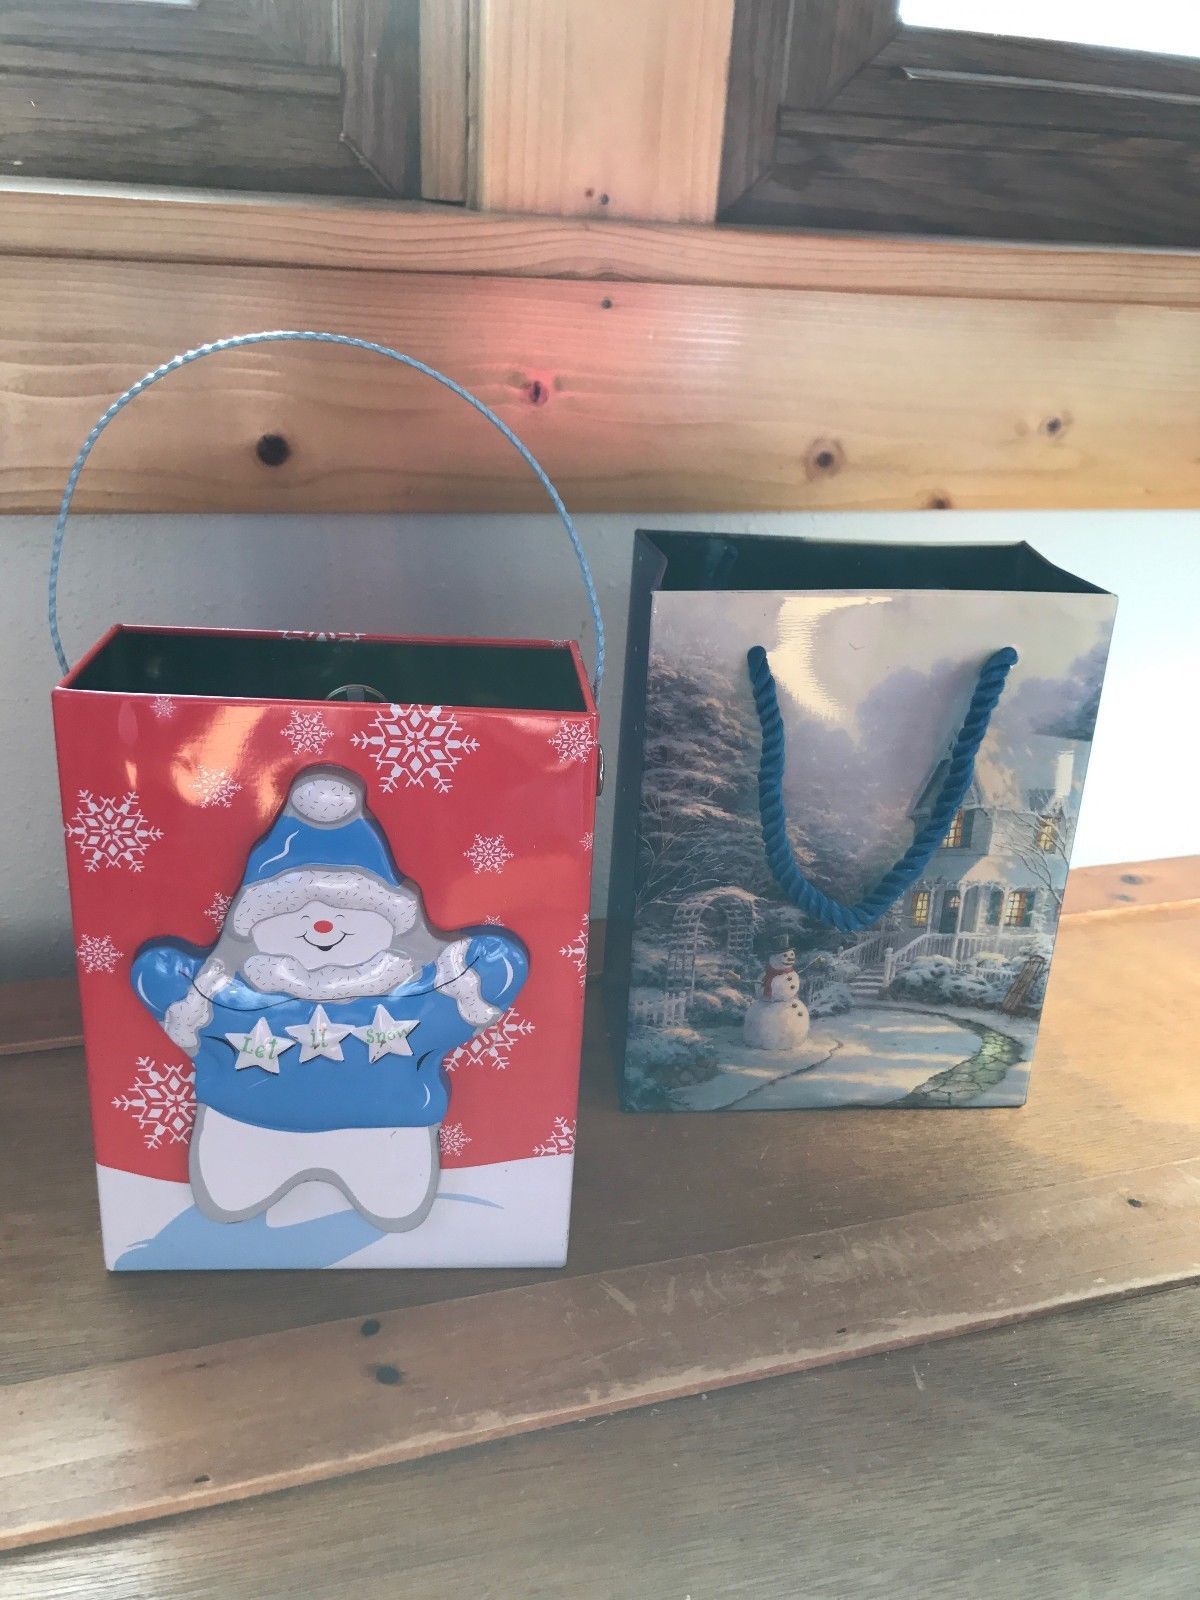 Lot of 2 Blue Thomas Kinkade Winter Snowman Small Metal Bags with Cord or Not  - $10.39